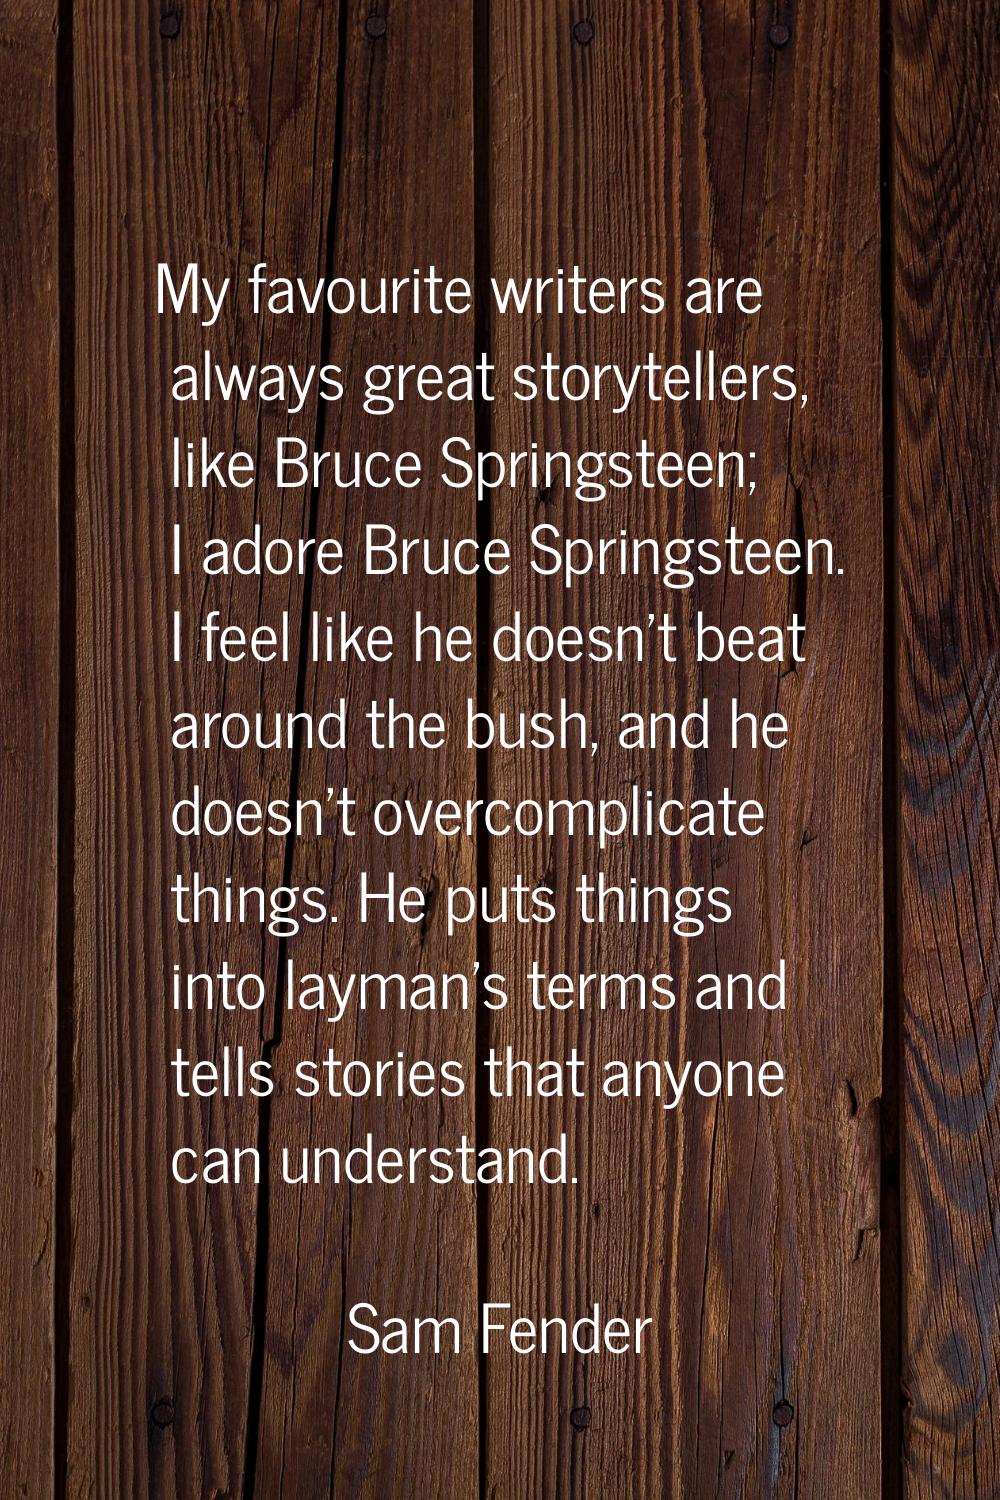 My favourite writers are always great storytellers, like Bruce Springsteen; I adore Bruce Springste